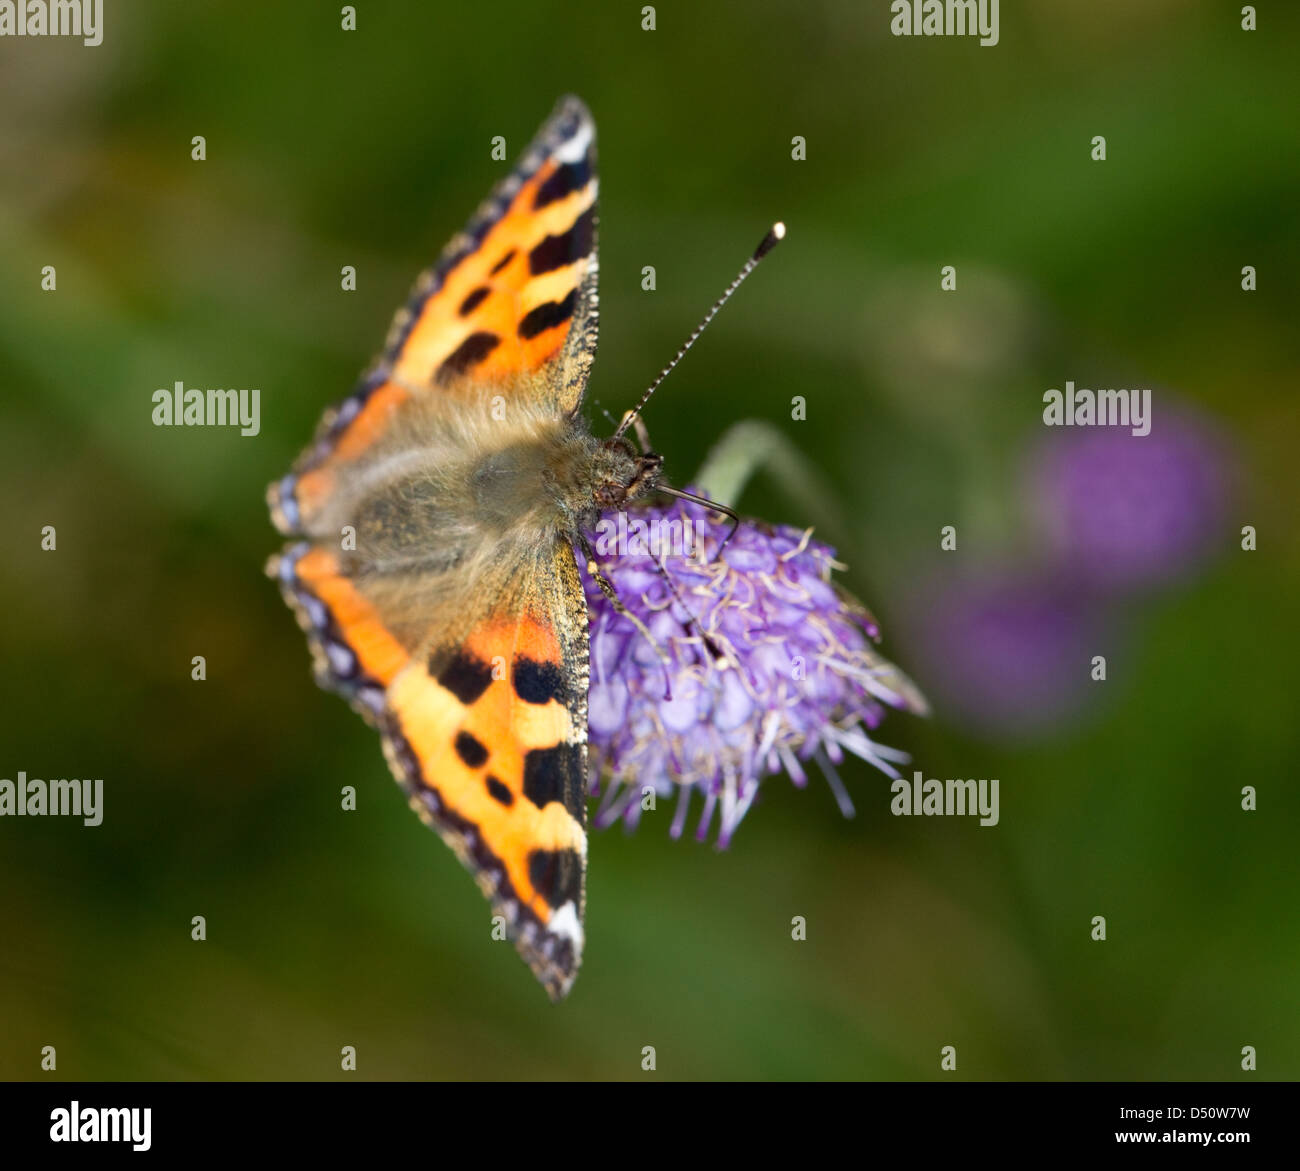 Aglais urticae,Small Tortoiseshell, butterfly resting on a purple flower Stock Photo